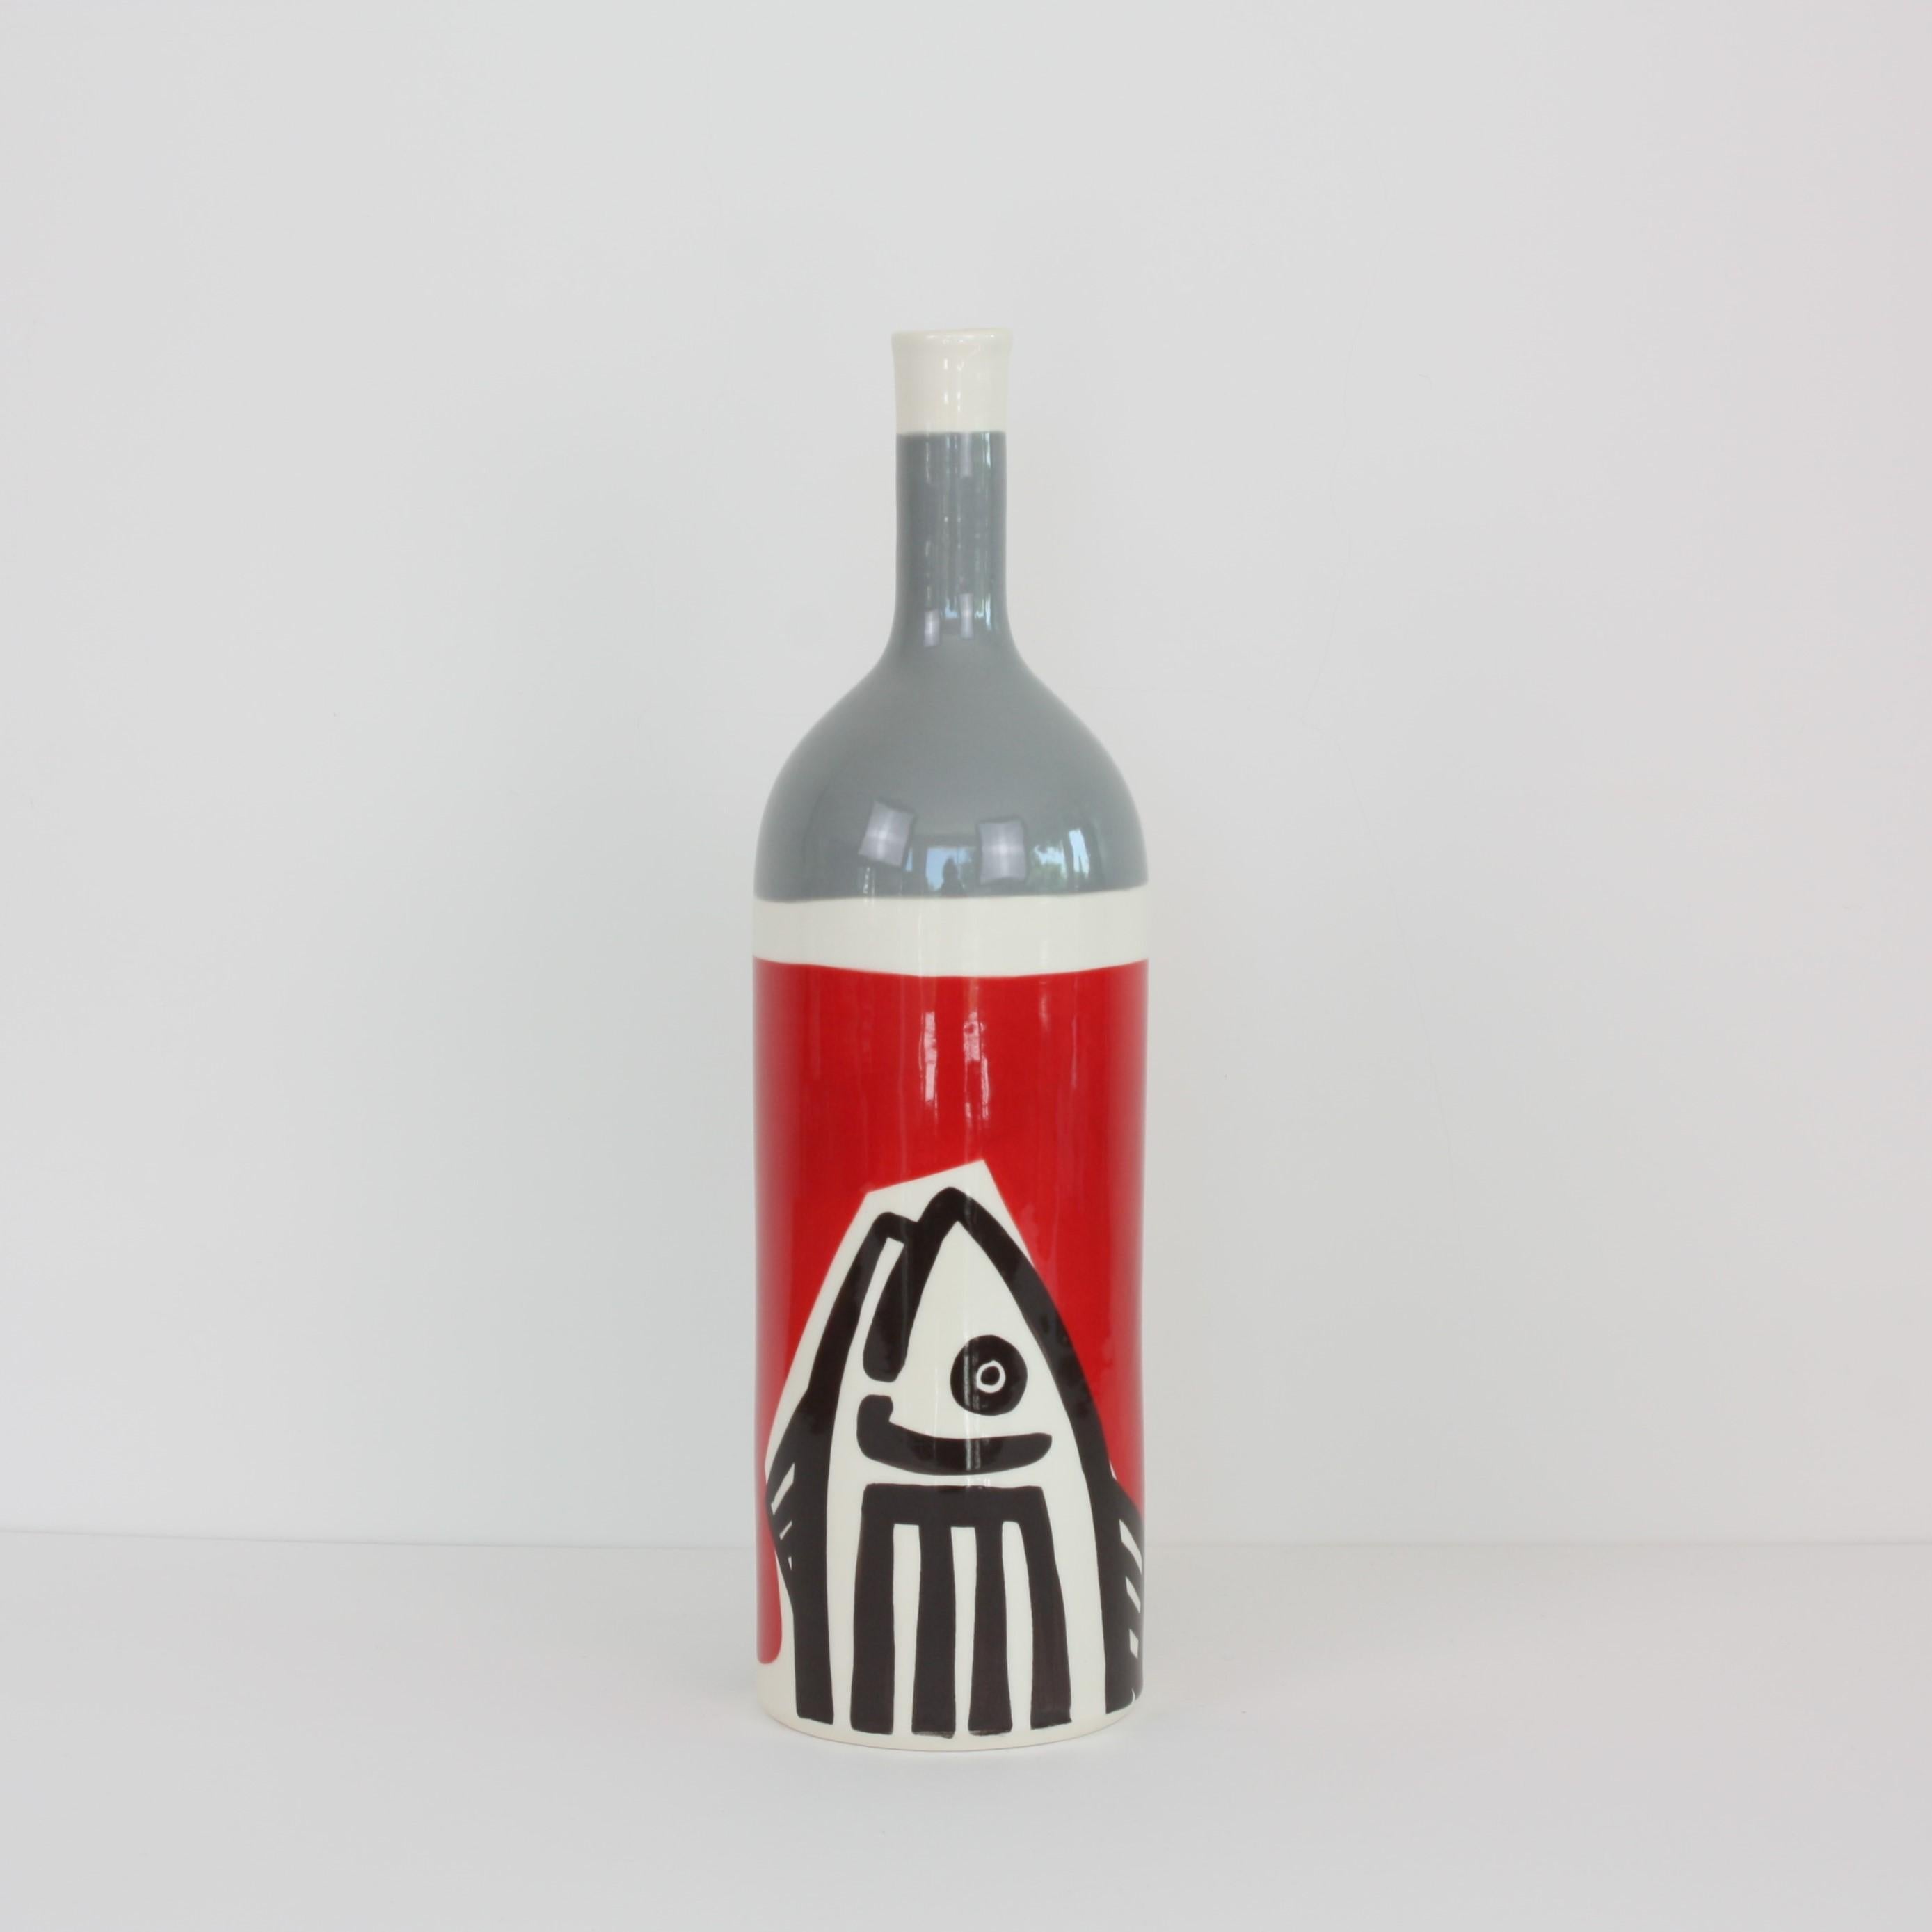 Modern Set of 3 Contemporary Ceramic Bottles with Nautical Motifs, Poisson